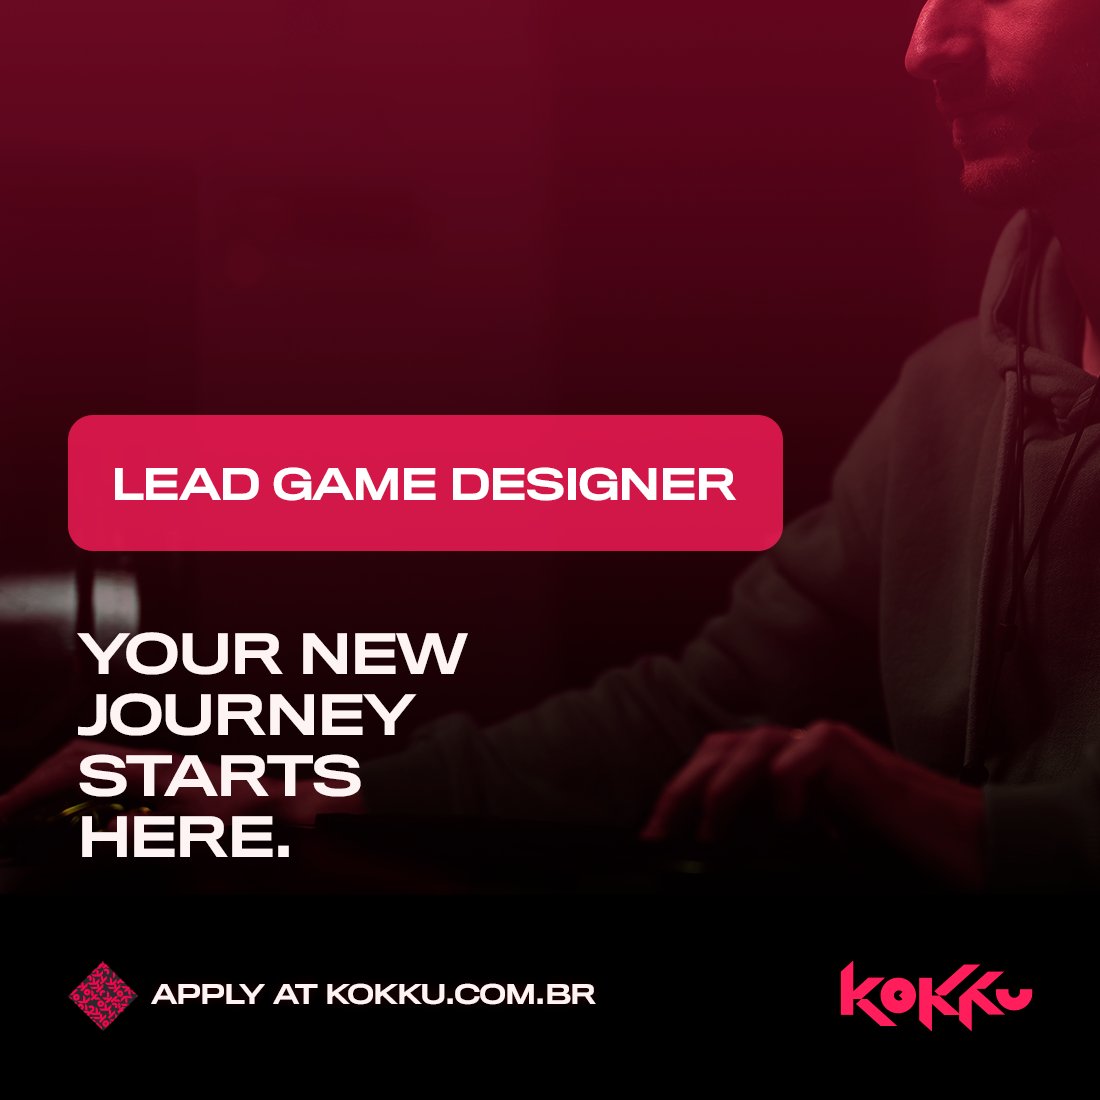 Kokku is seeking a Lead Game Designer to lead their team in innovative game design. The role involves guiding, supporting, and managing the team, sharing knowledge and techniques to enhance their skills. 🔗 Apply now: apply.workable.com/kokku-games/j/…